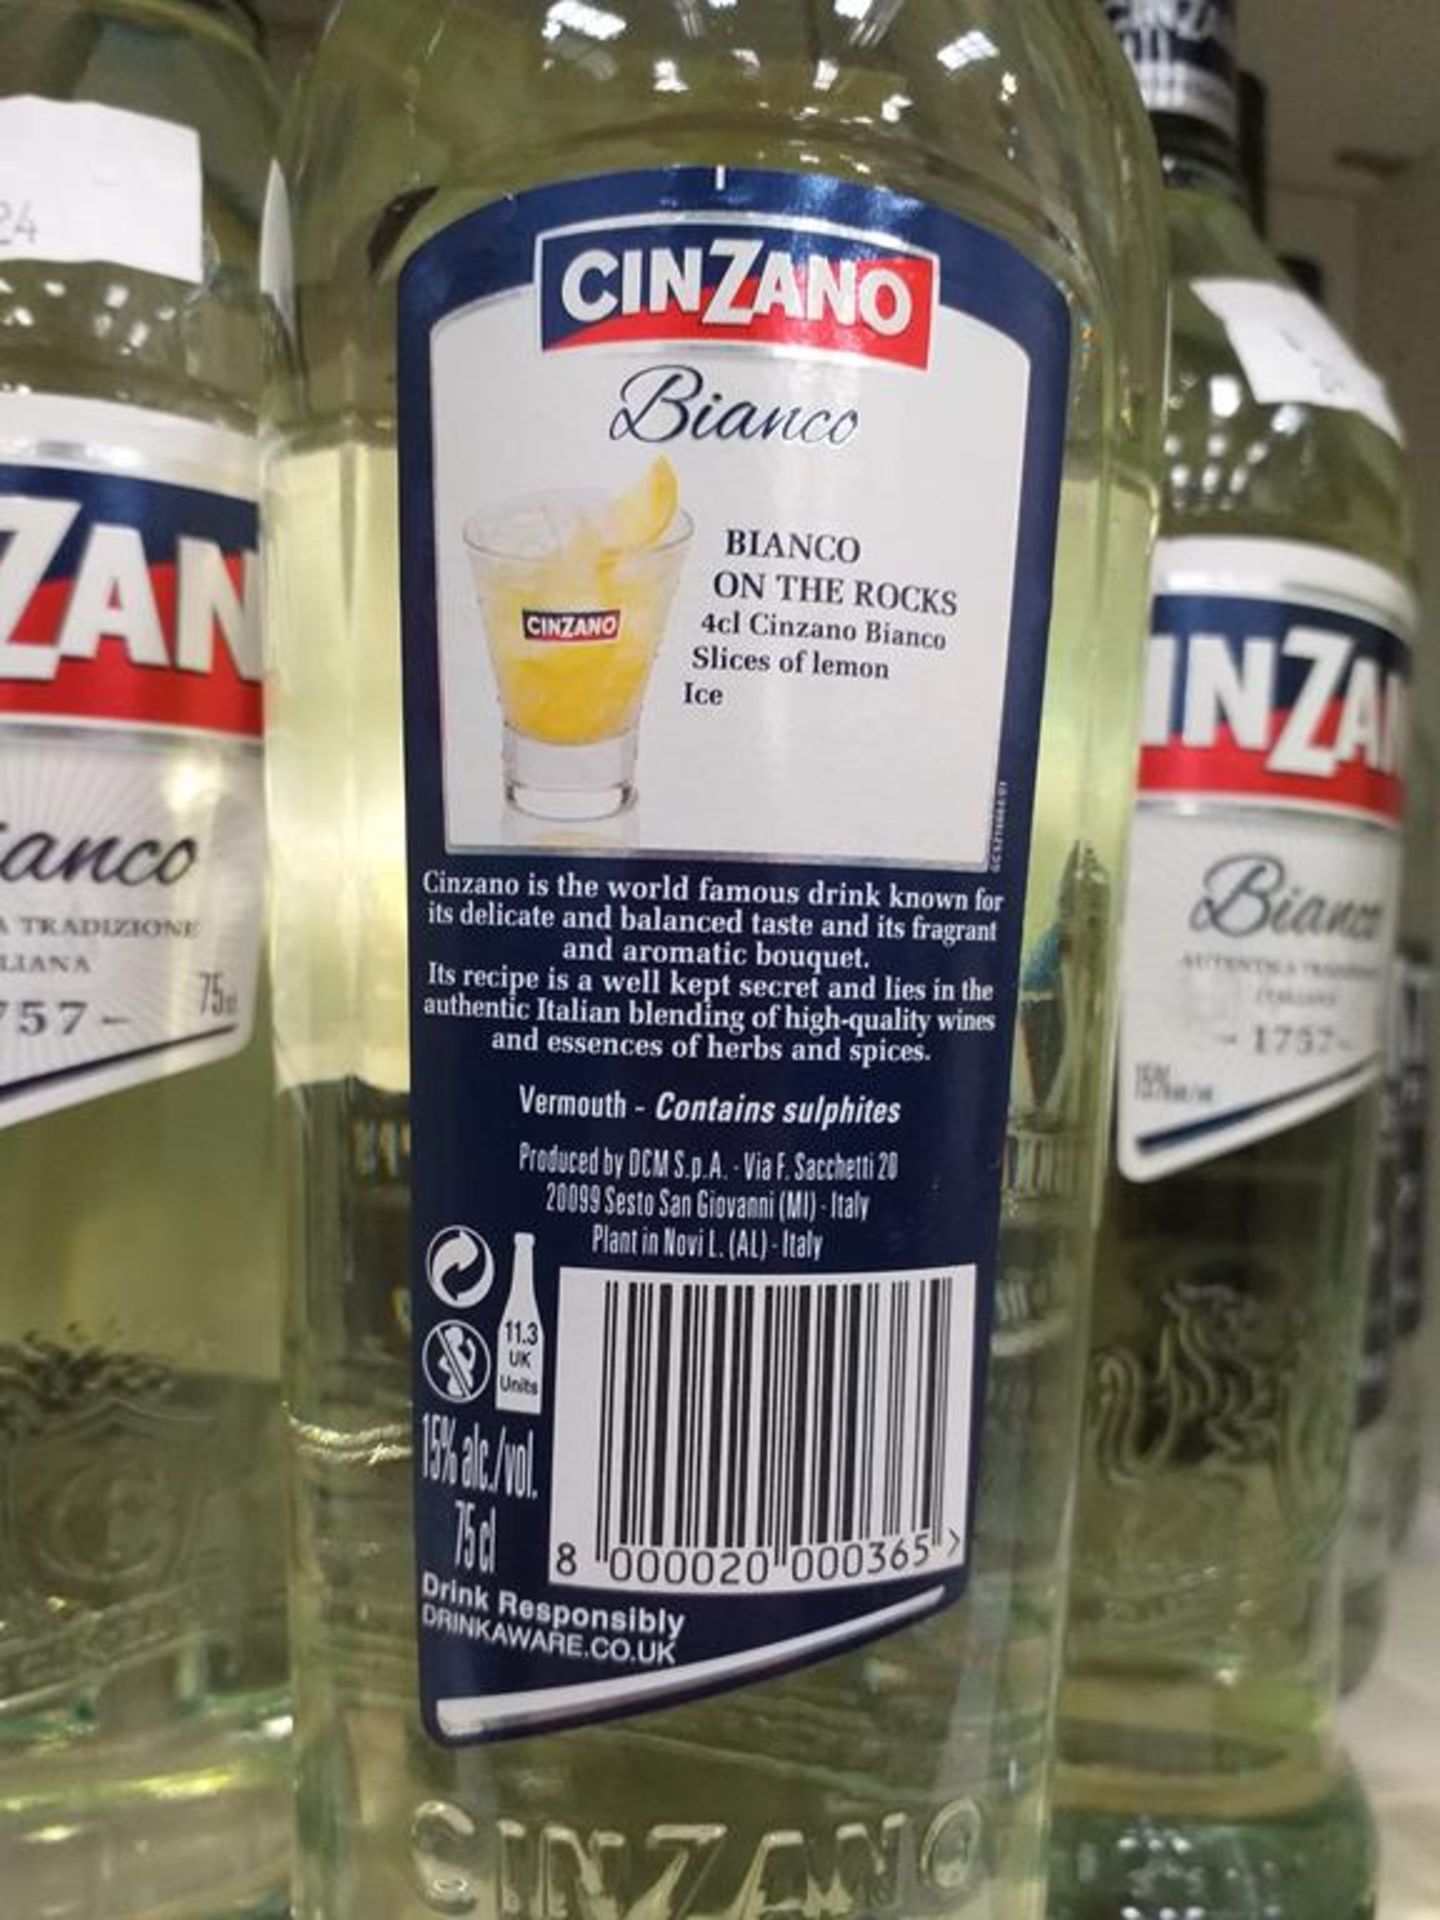 Ten bottles of V-Kat Dry Schnapps and six bottles of Cinzano Bianco Vermouth - Image 3 of 5